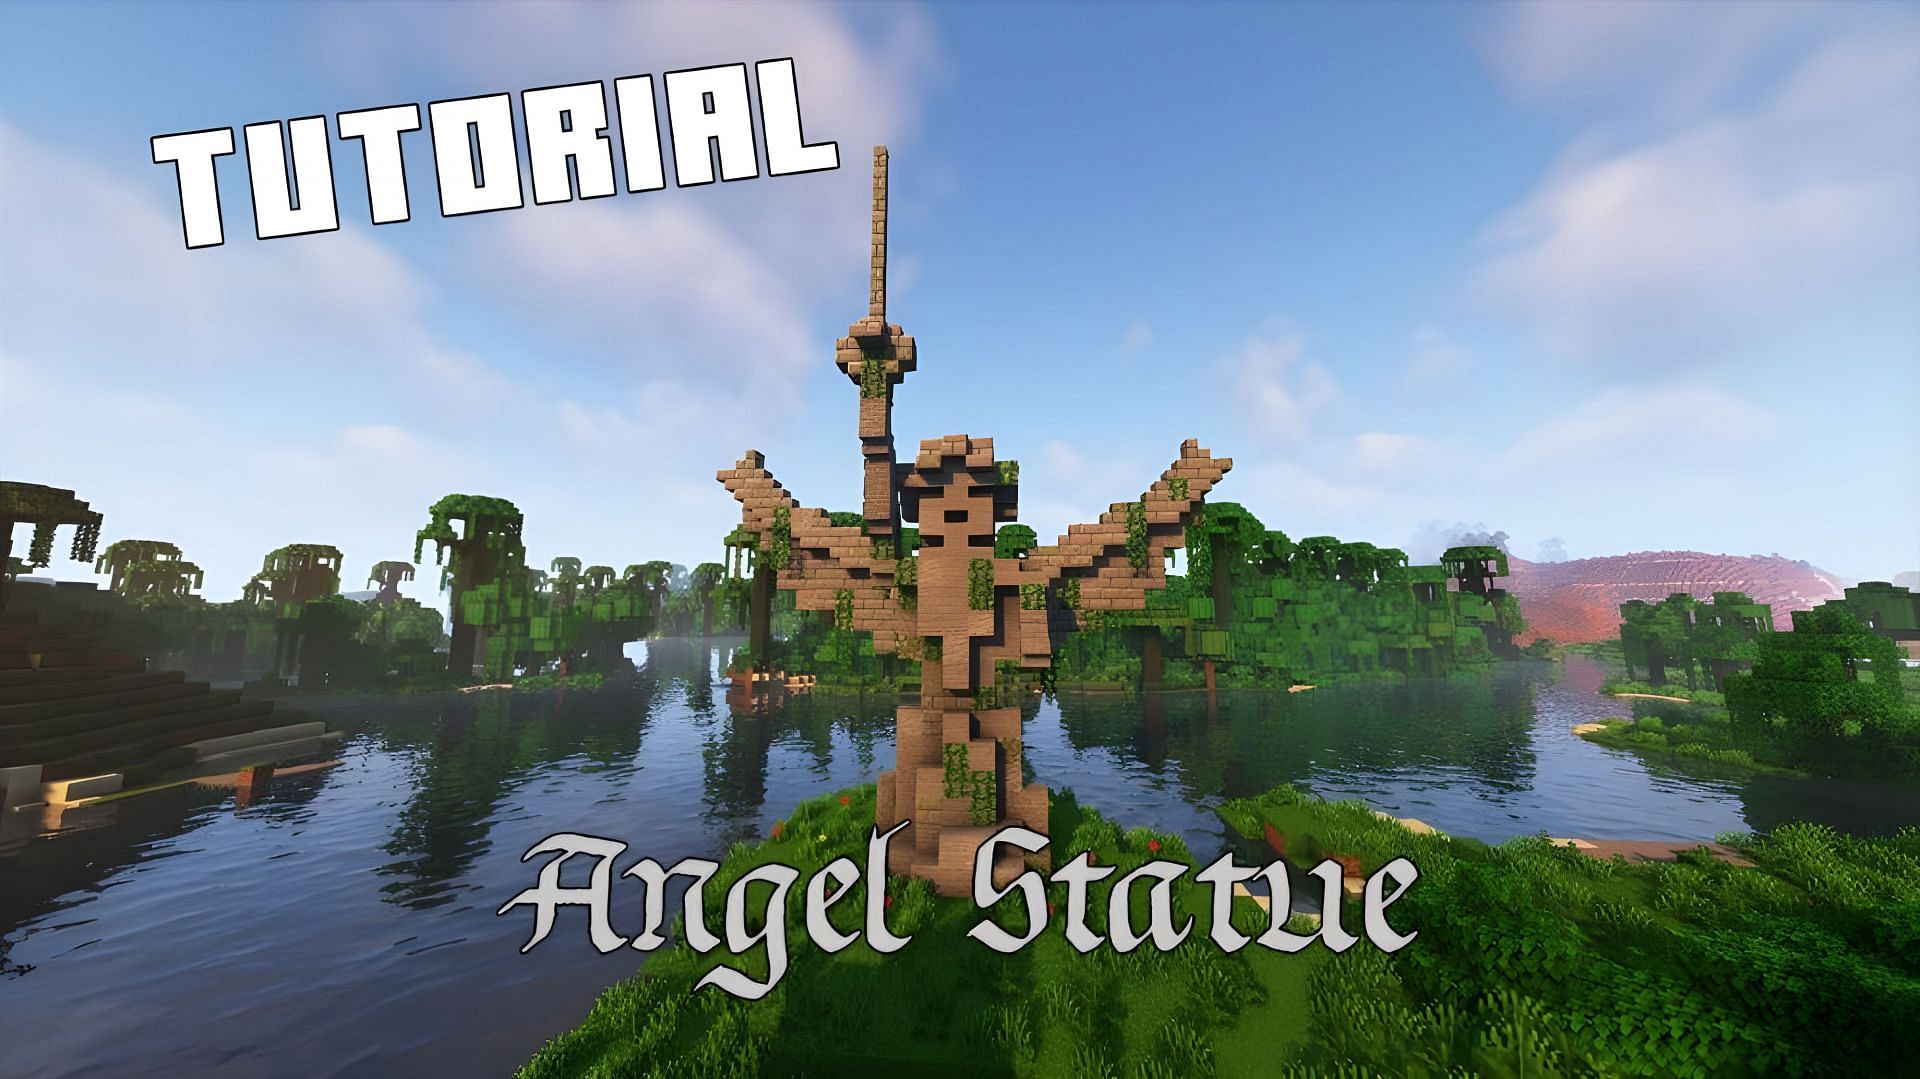 The Angel Statue (Image via YouTube/TRBuilds)